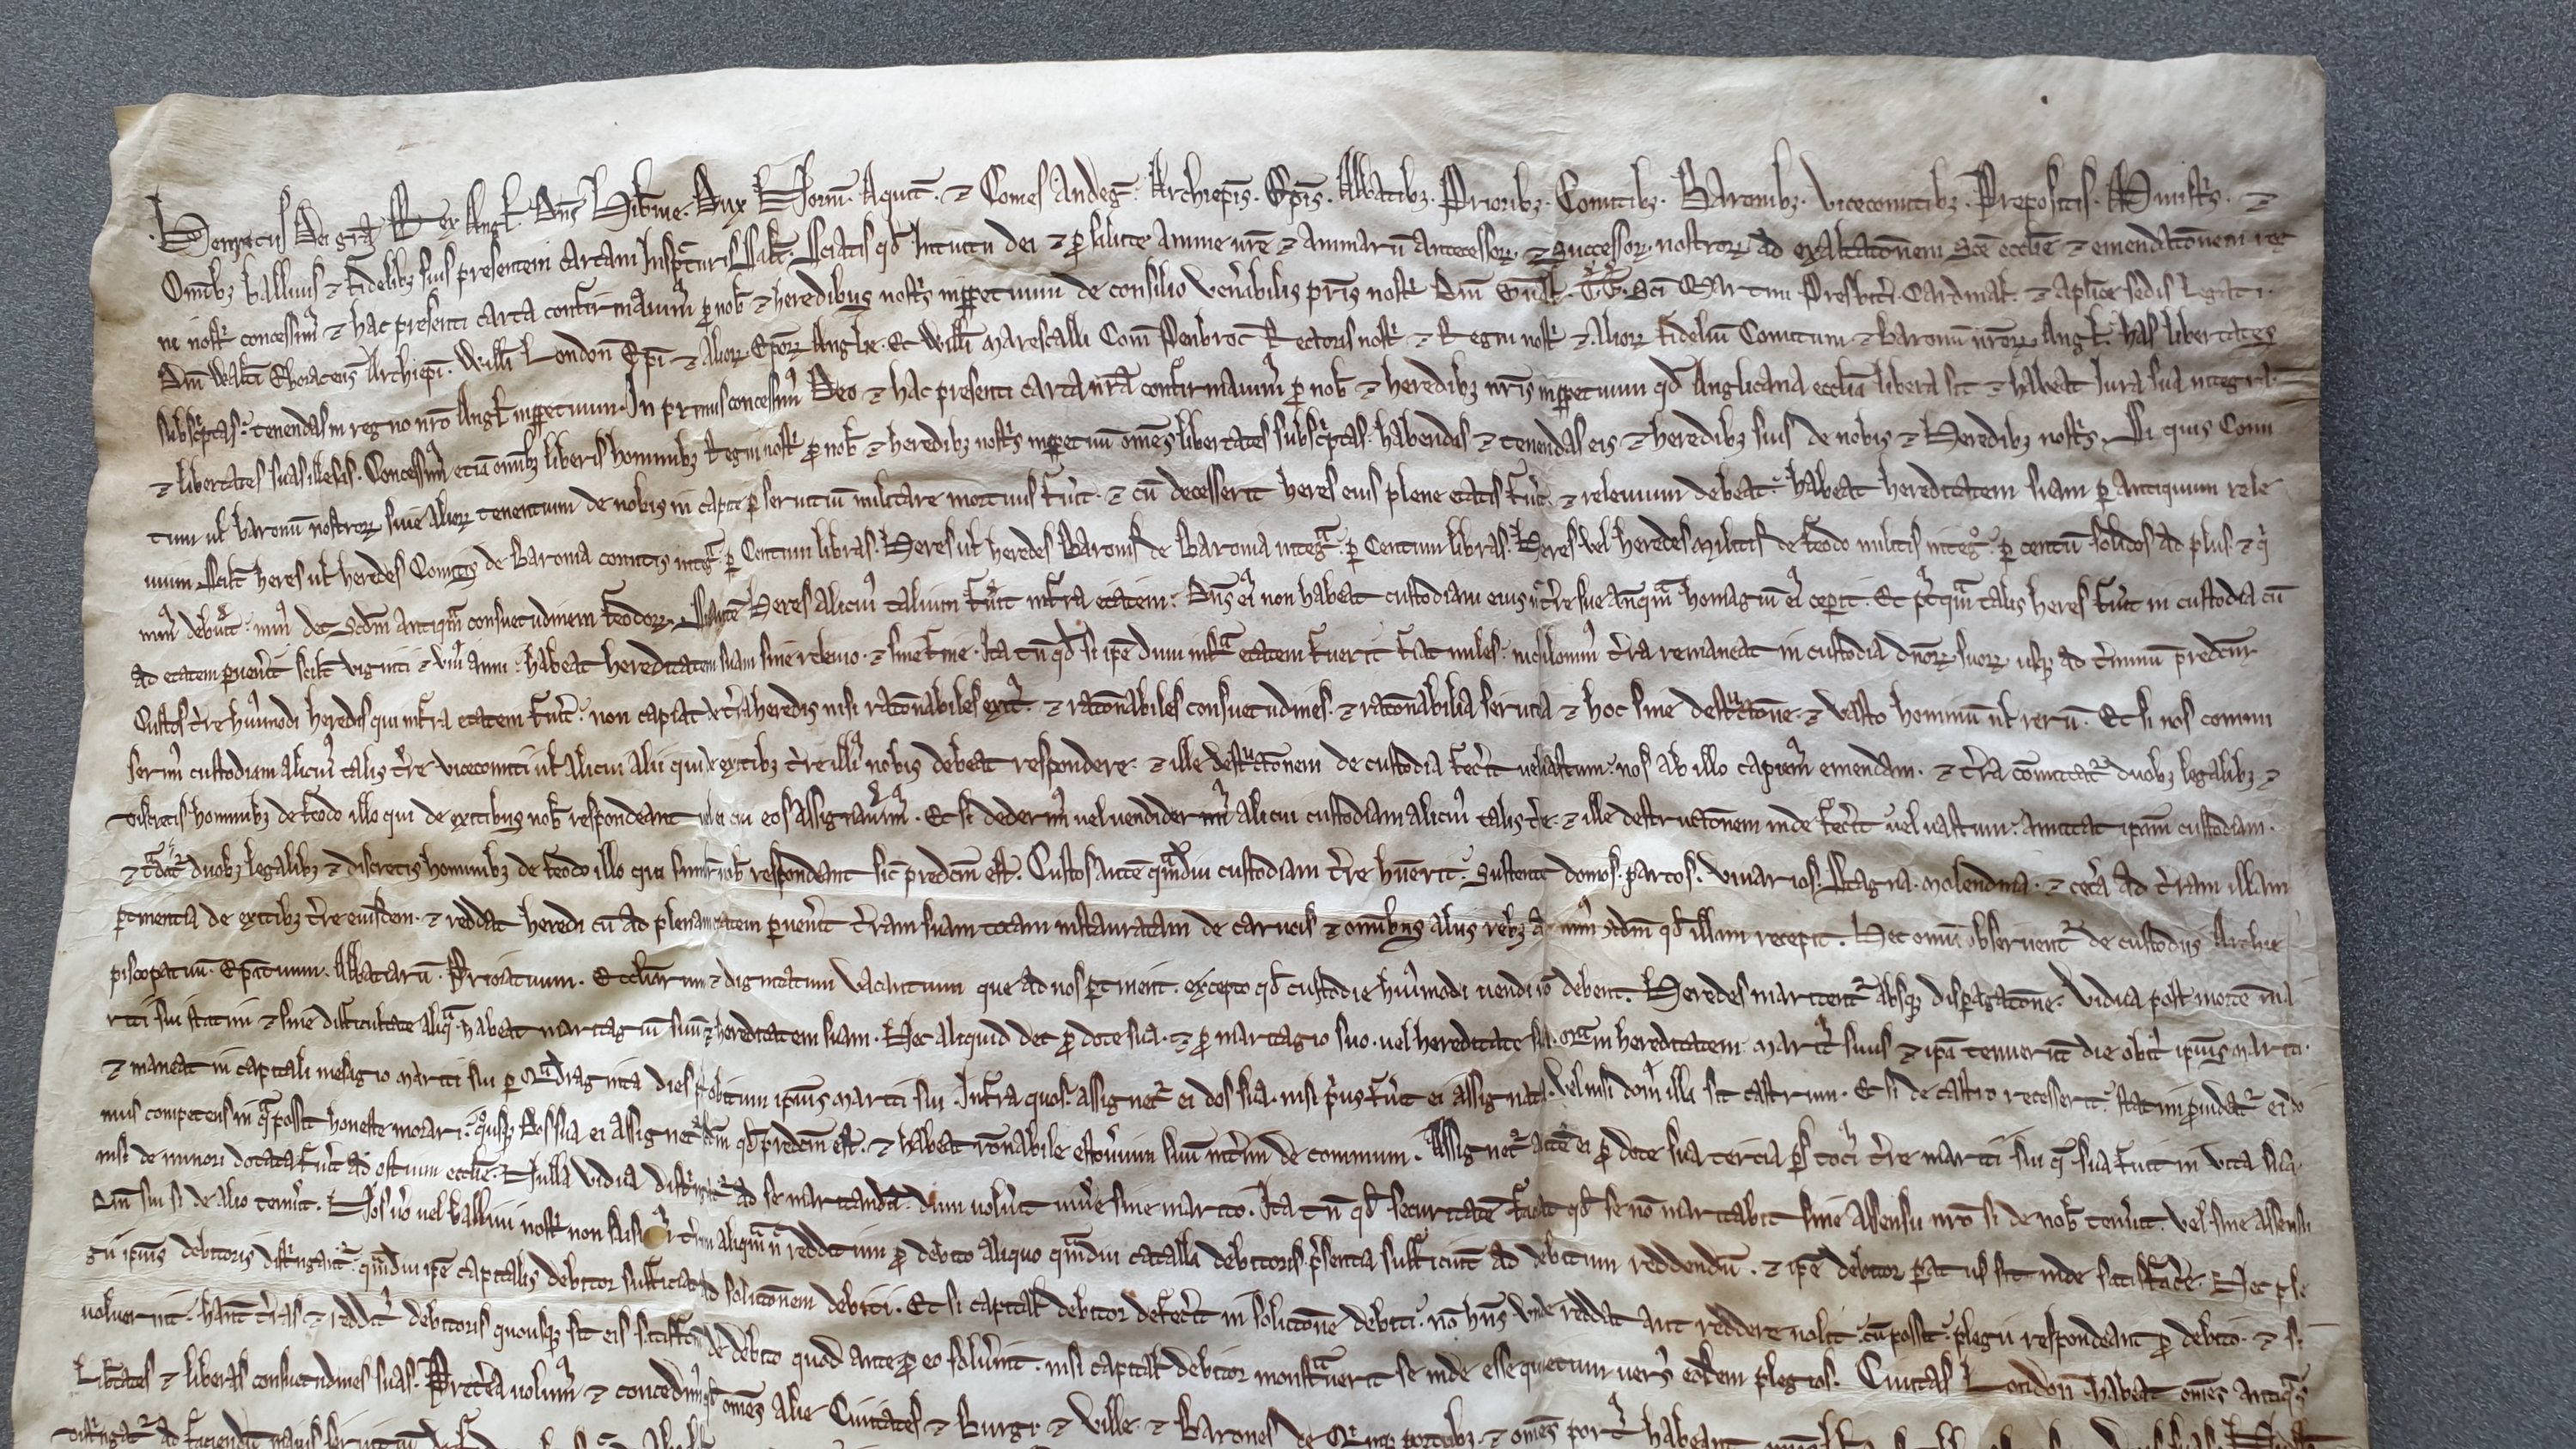 A Really Old, Very Important Copy of the Magna Carta Has Come to DC -  Washingtonian